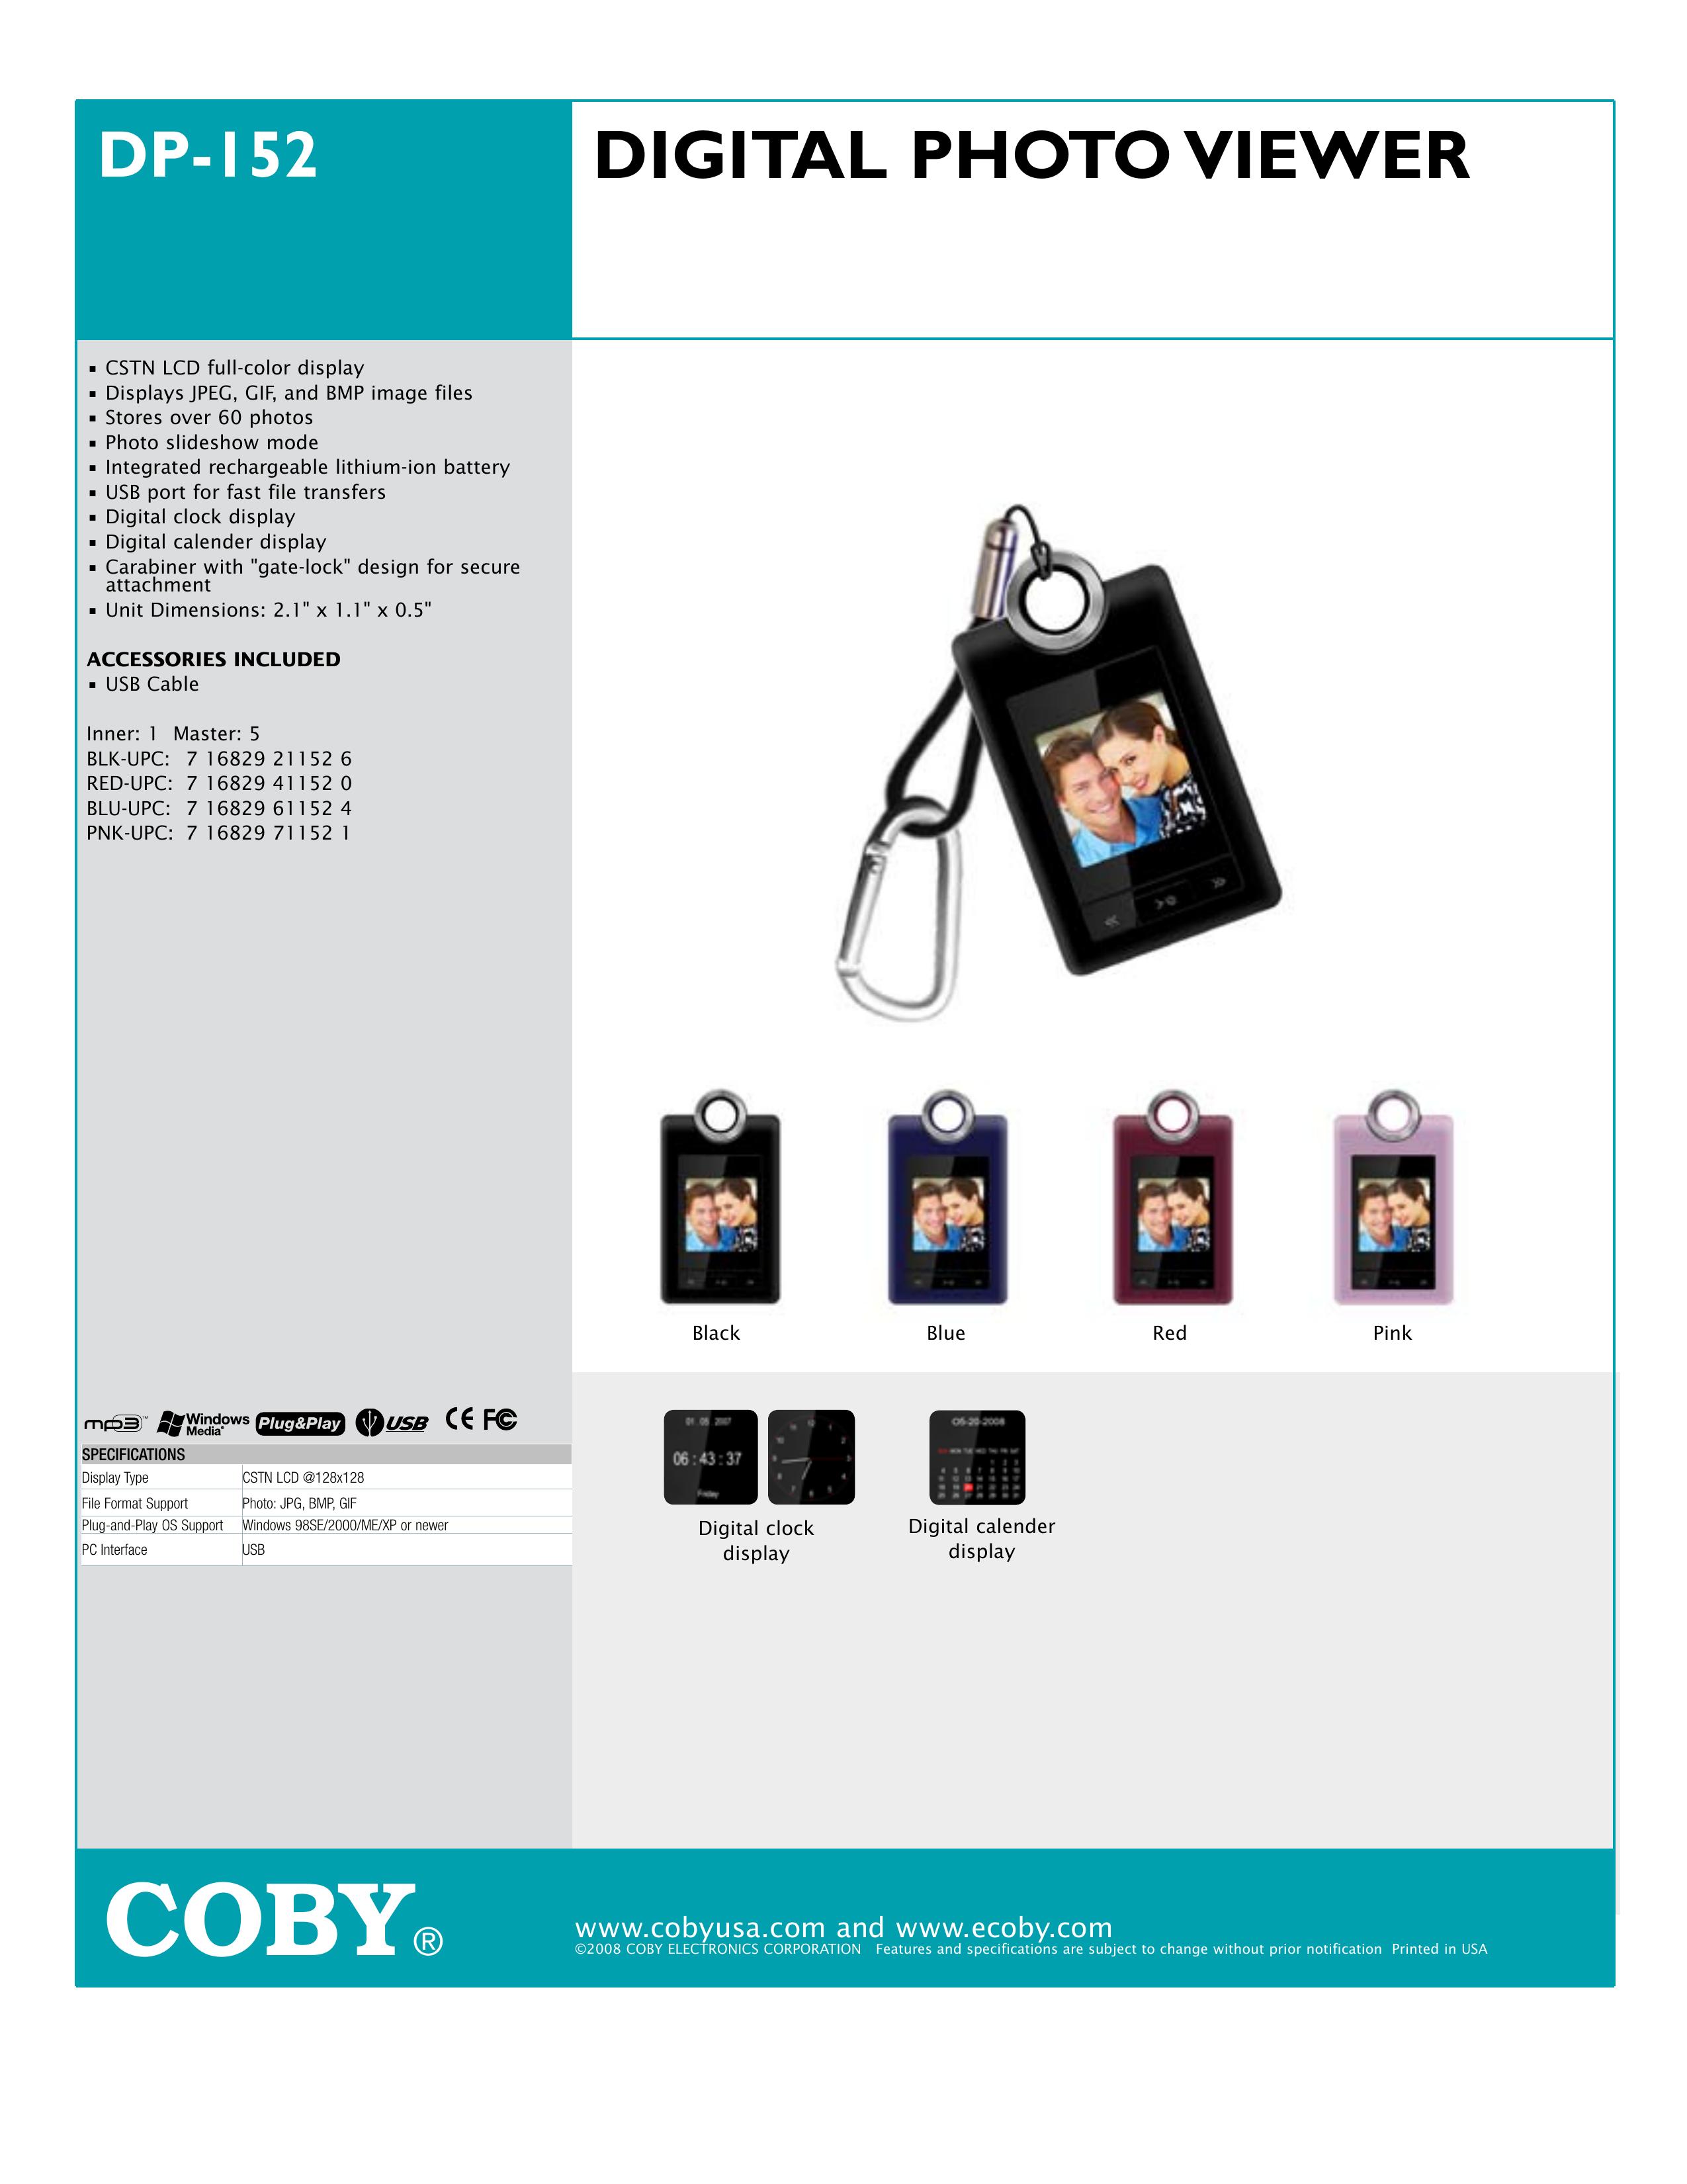 COBY electronic DP-152 Digital Photo Frame User Manual